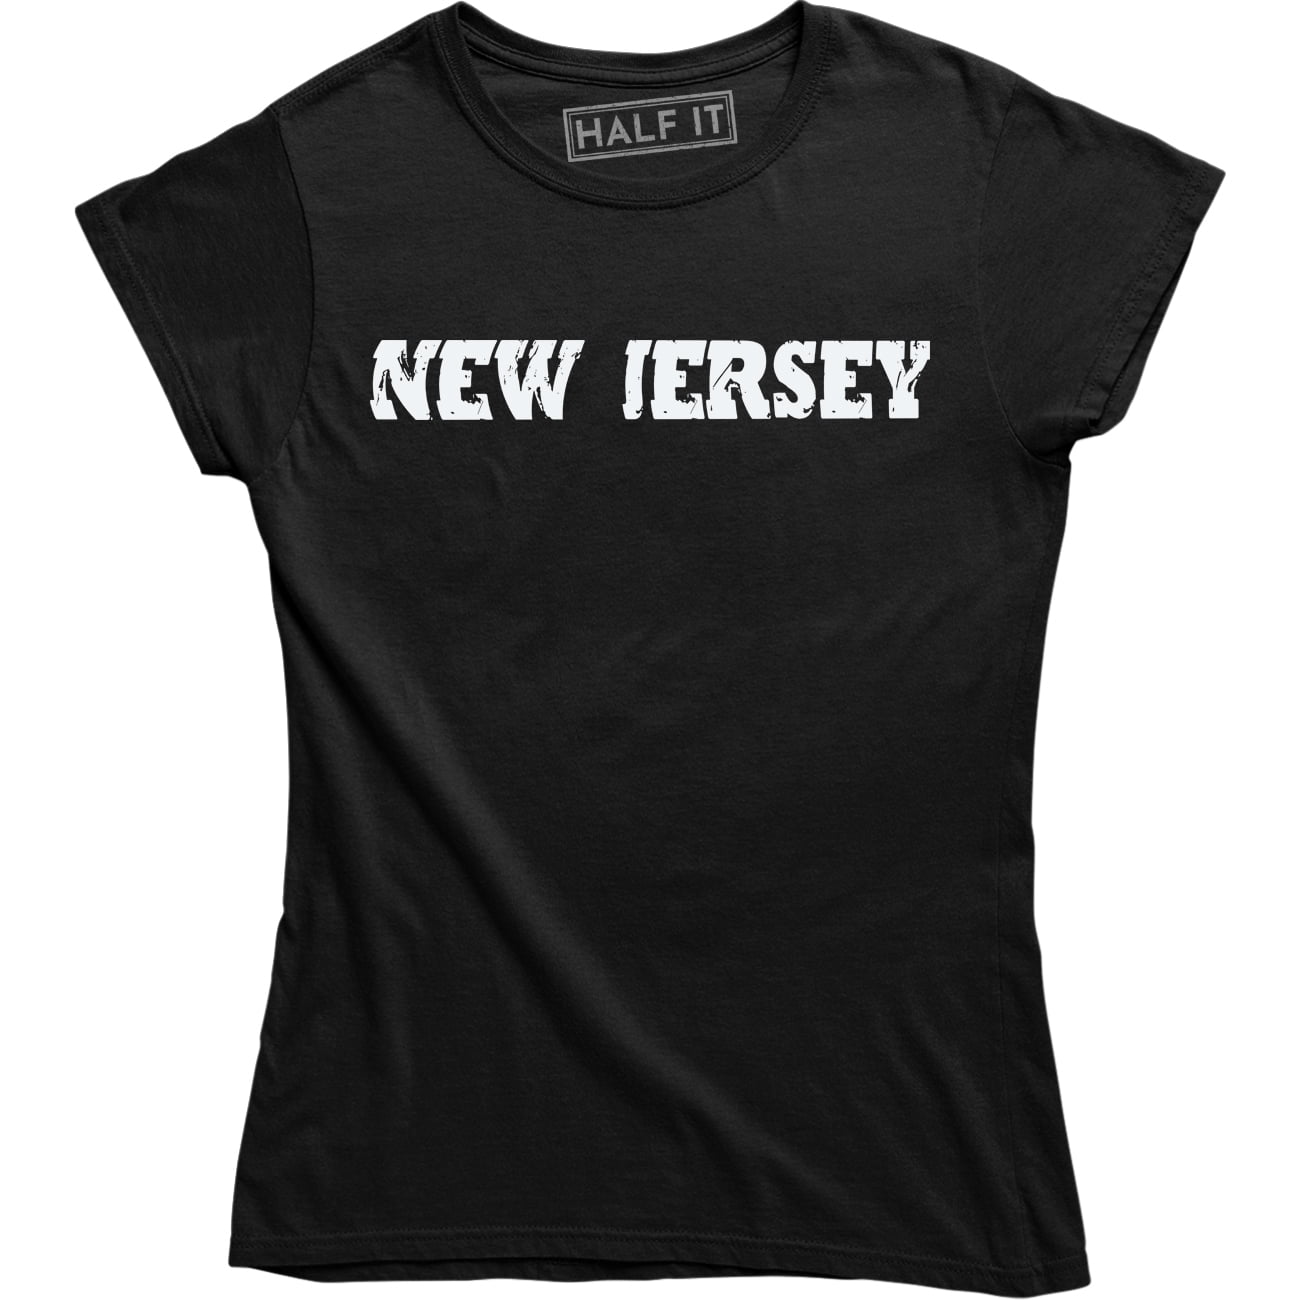 New Jersey The Greatest Country In The World T-shirt